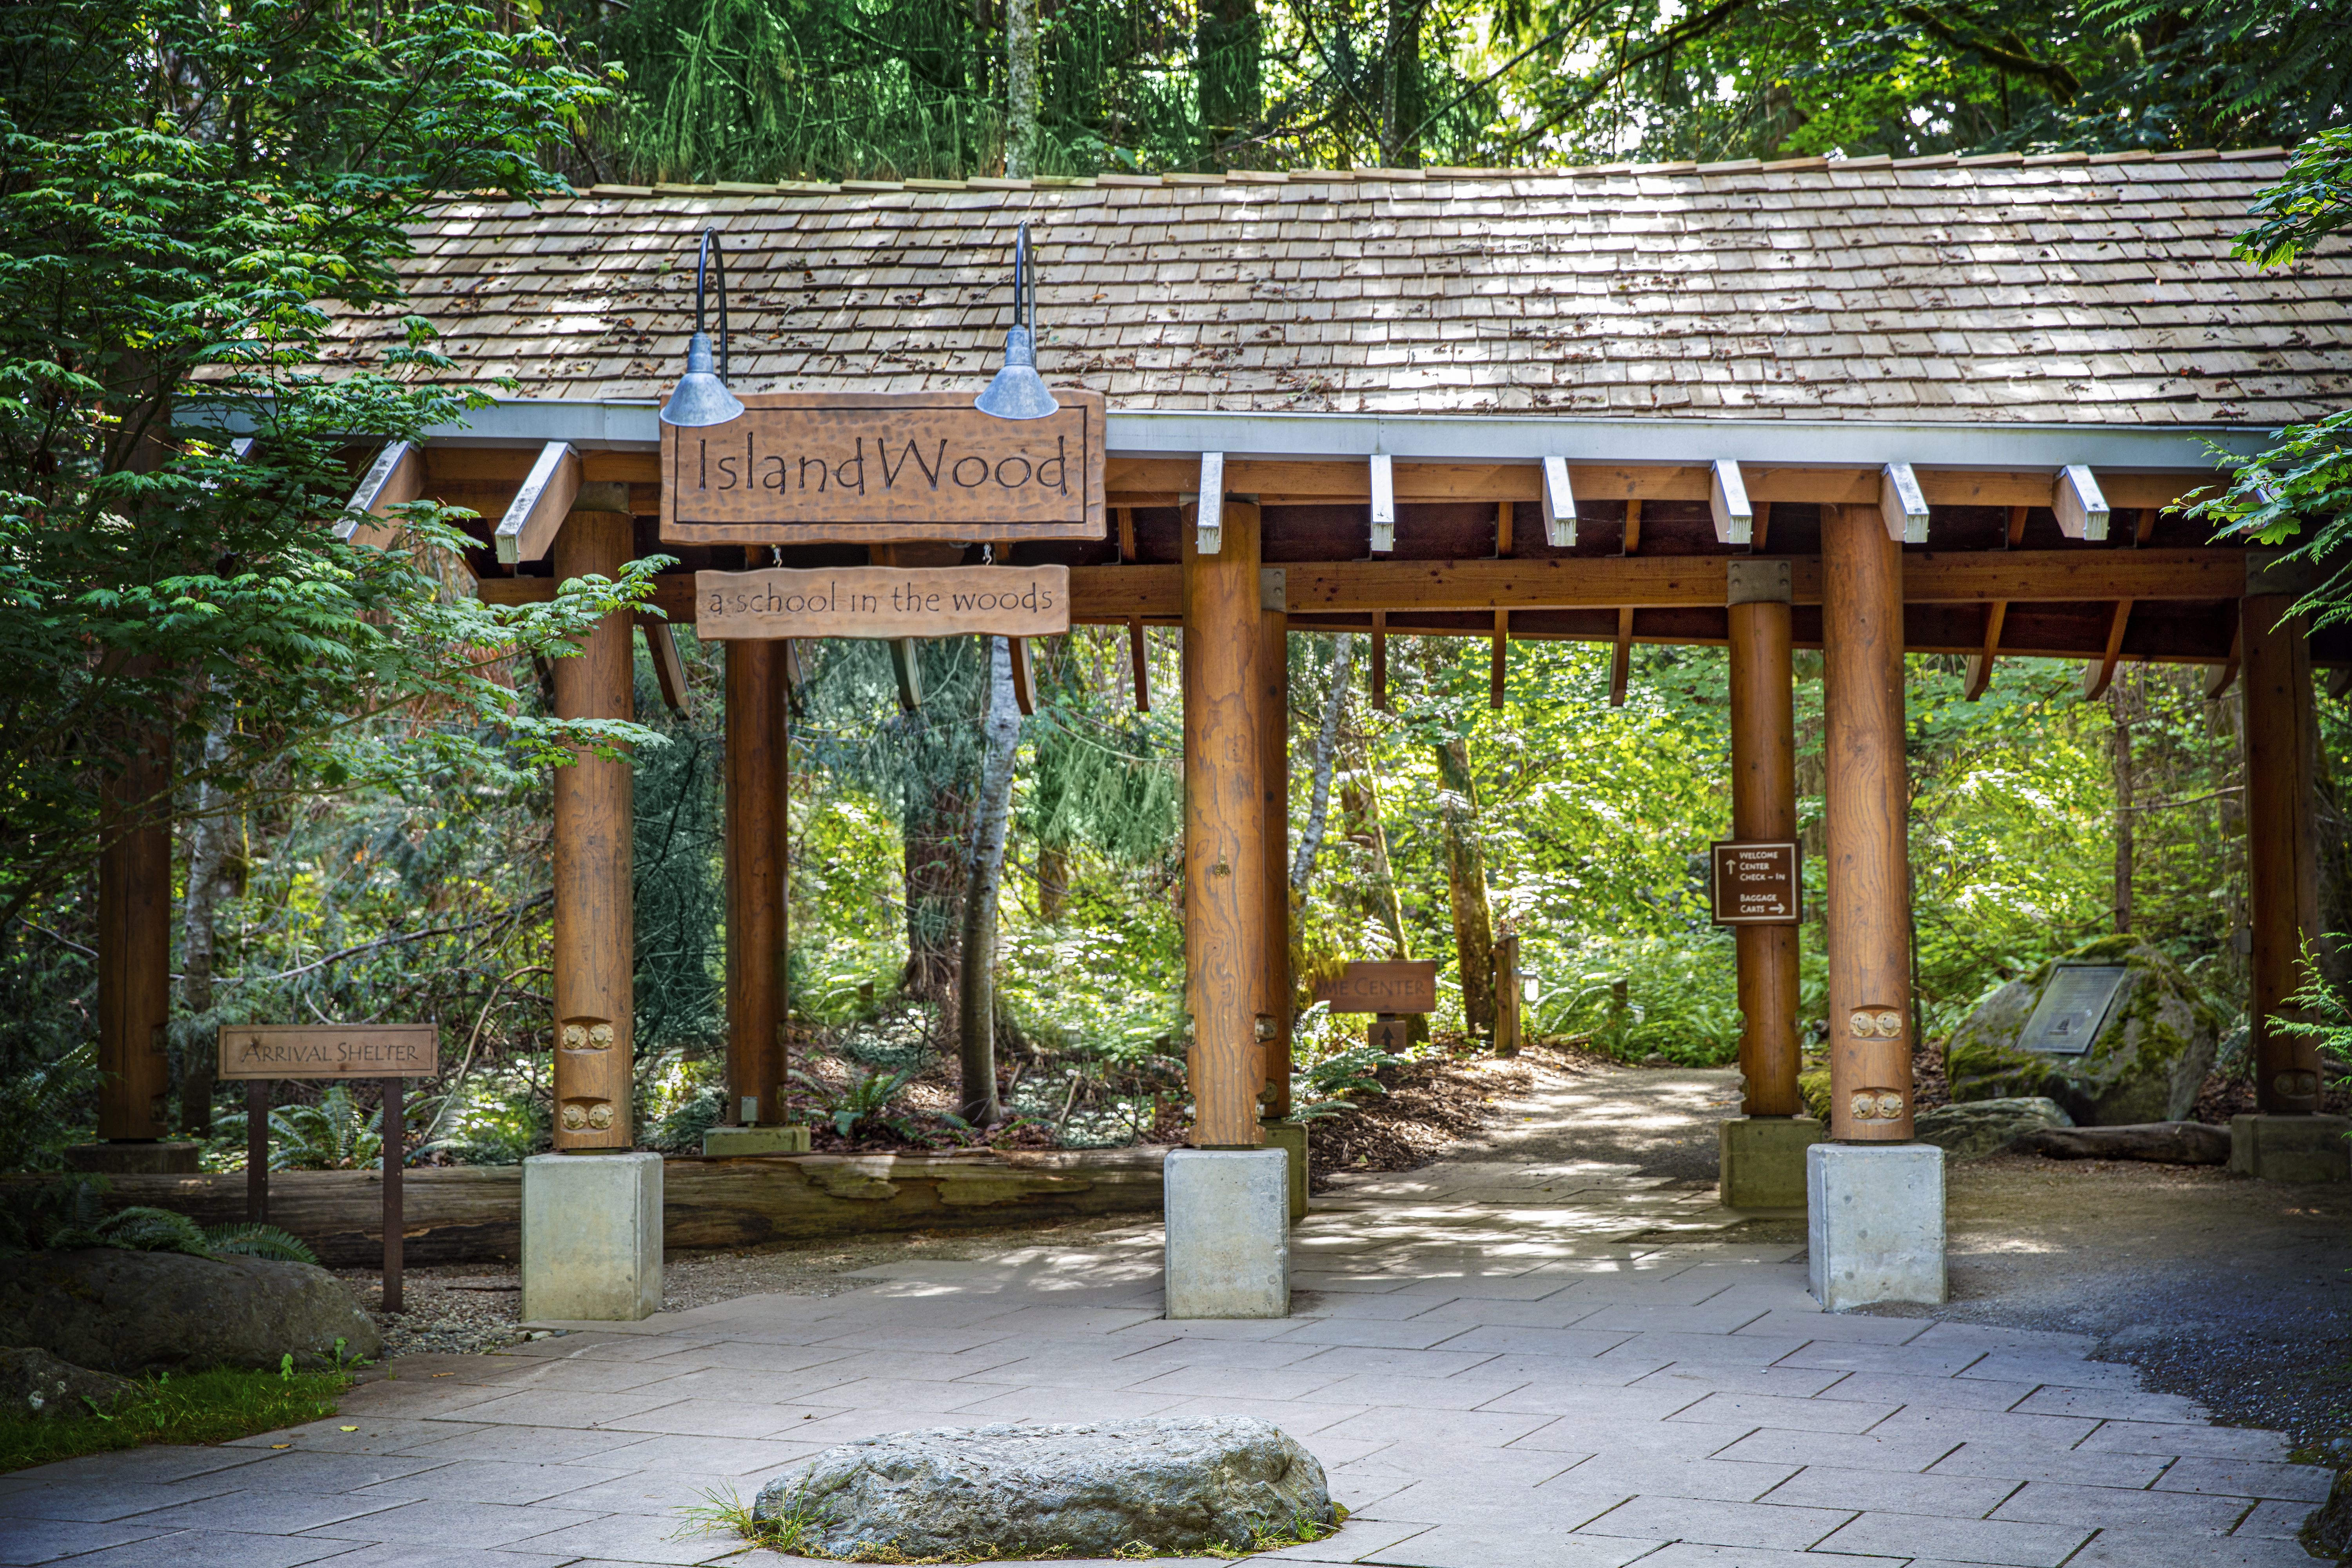 The Arrival Shelter at IslandWood's Bainbridge Island campus. A wood sign says "IslandWood," with a smaller wood sign below it, which says "A school in the woods."